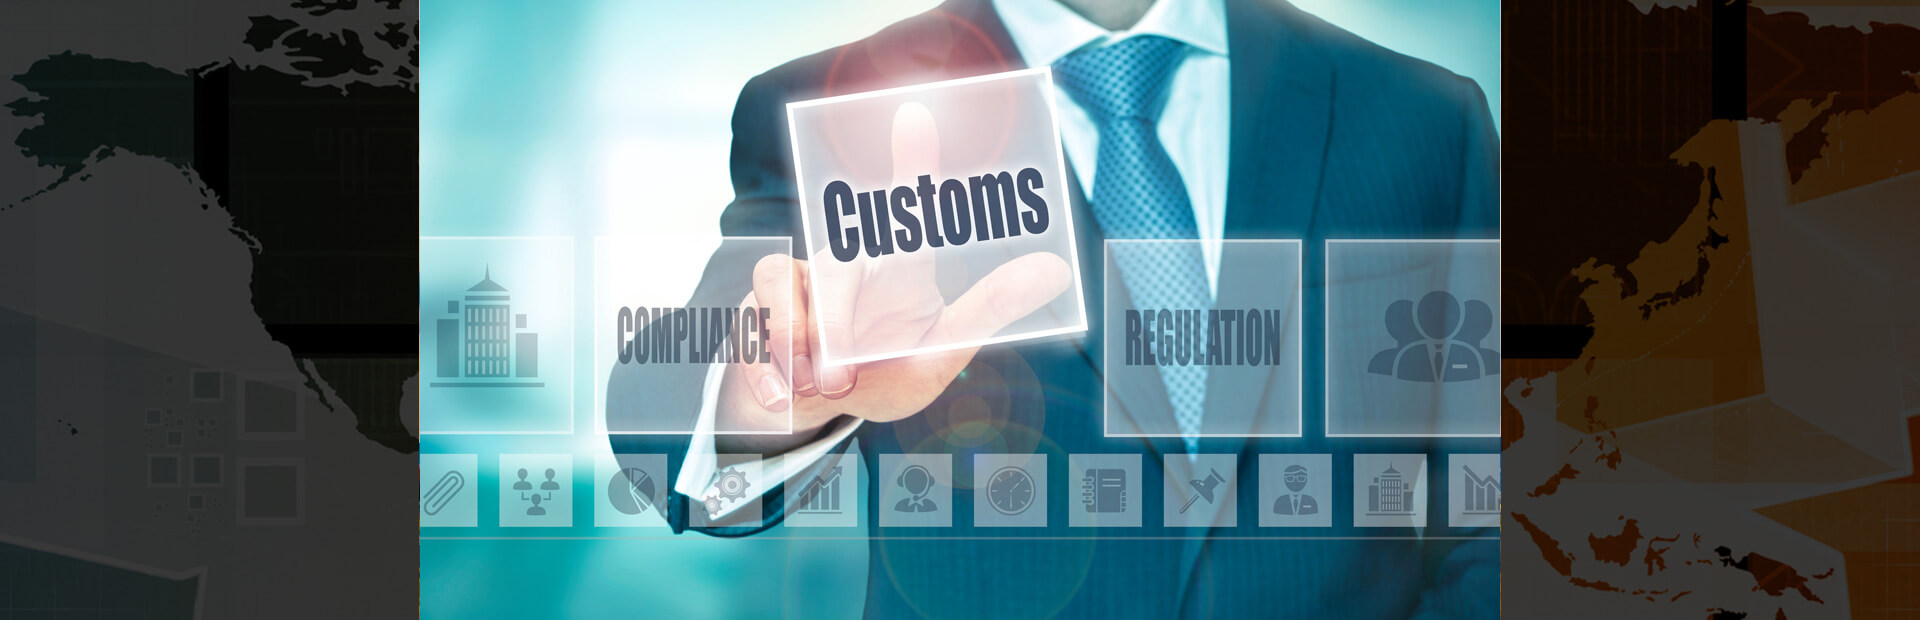 CWG Customs Broker - laws and compliance